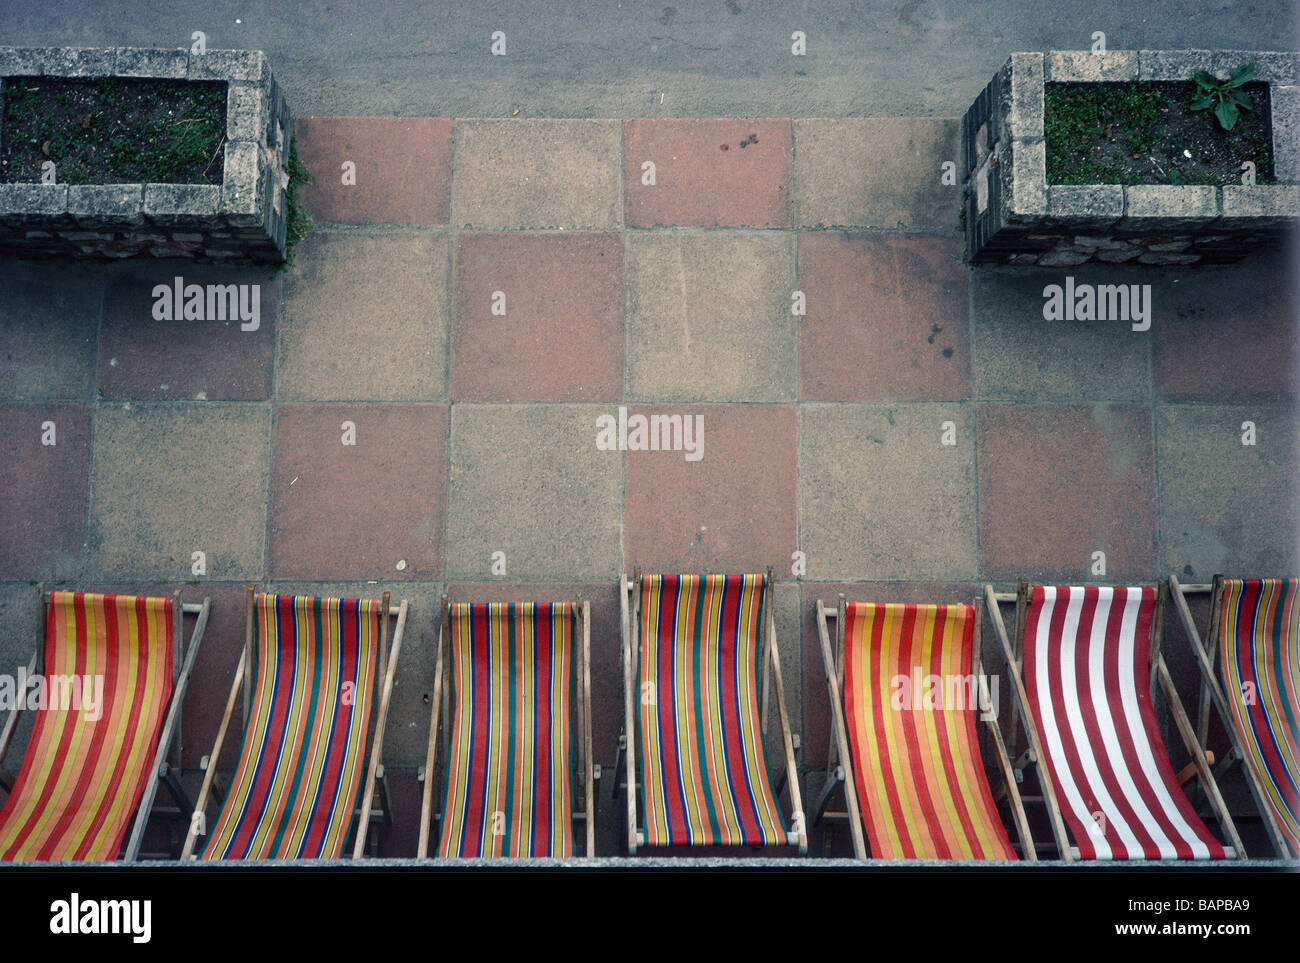 Graphic composition from above of stripped beach chairs and a grid of patio tiles Stock Photo